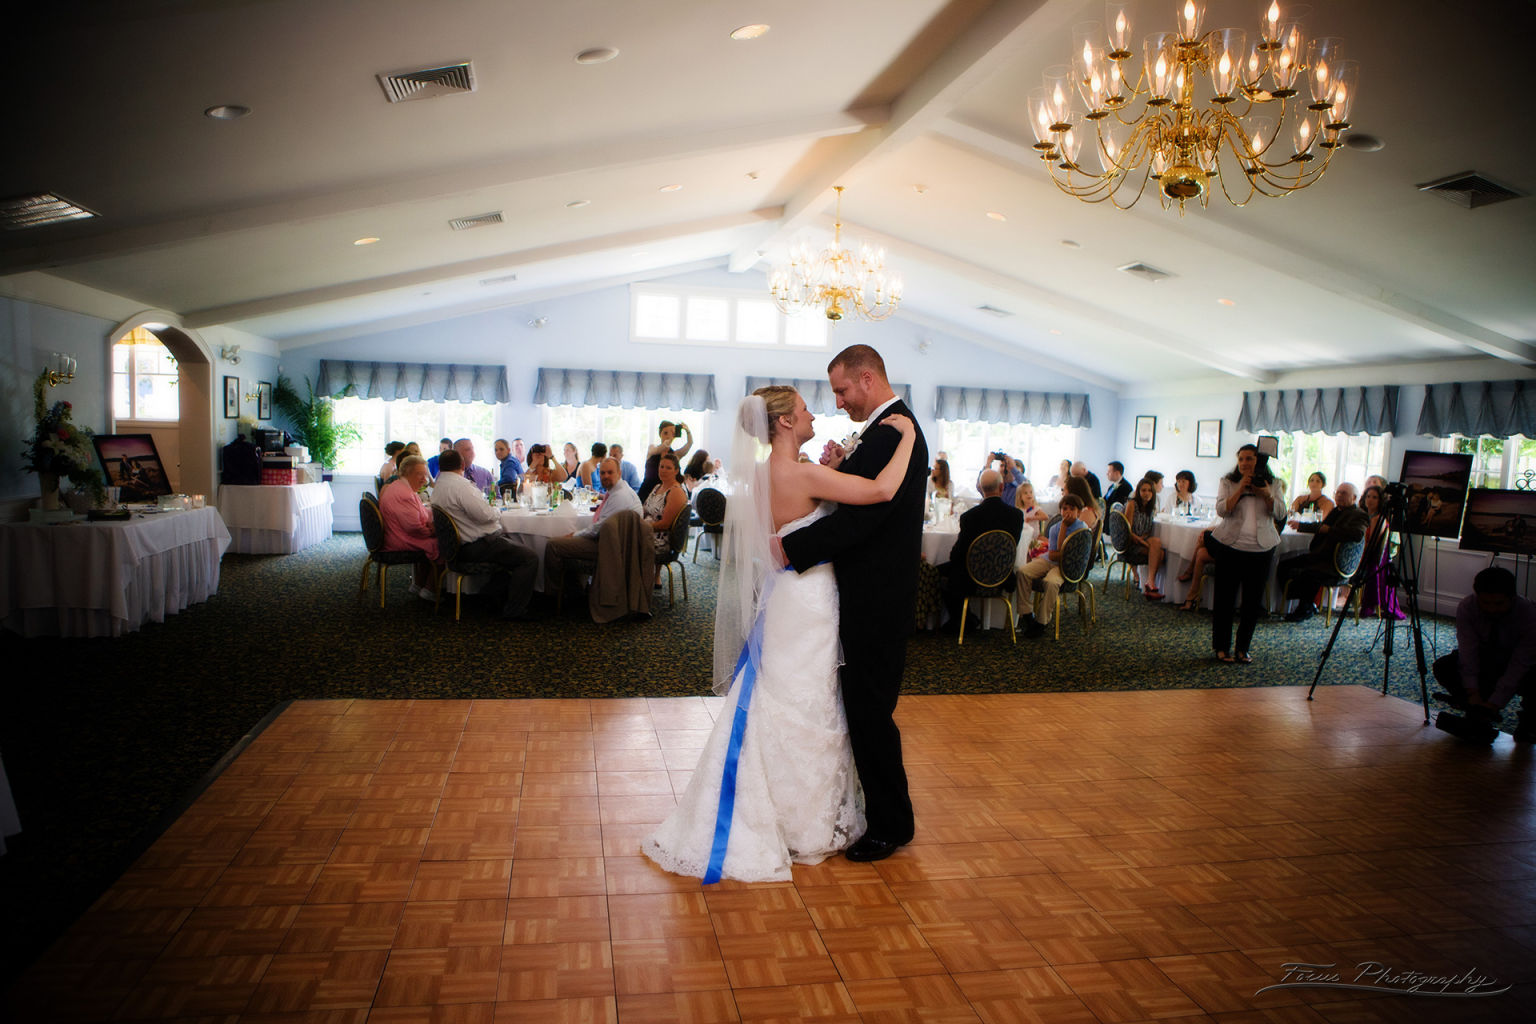 The bride and groom's first dance of their wedding